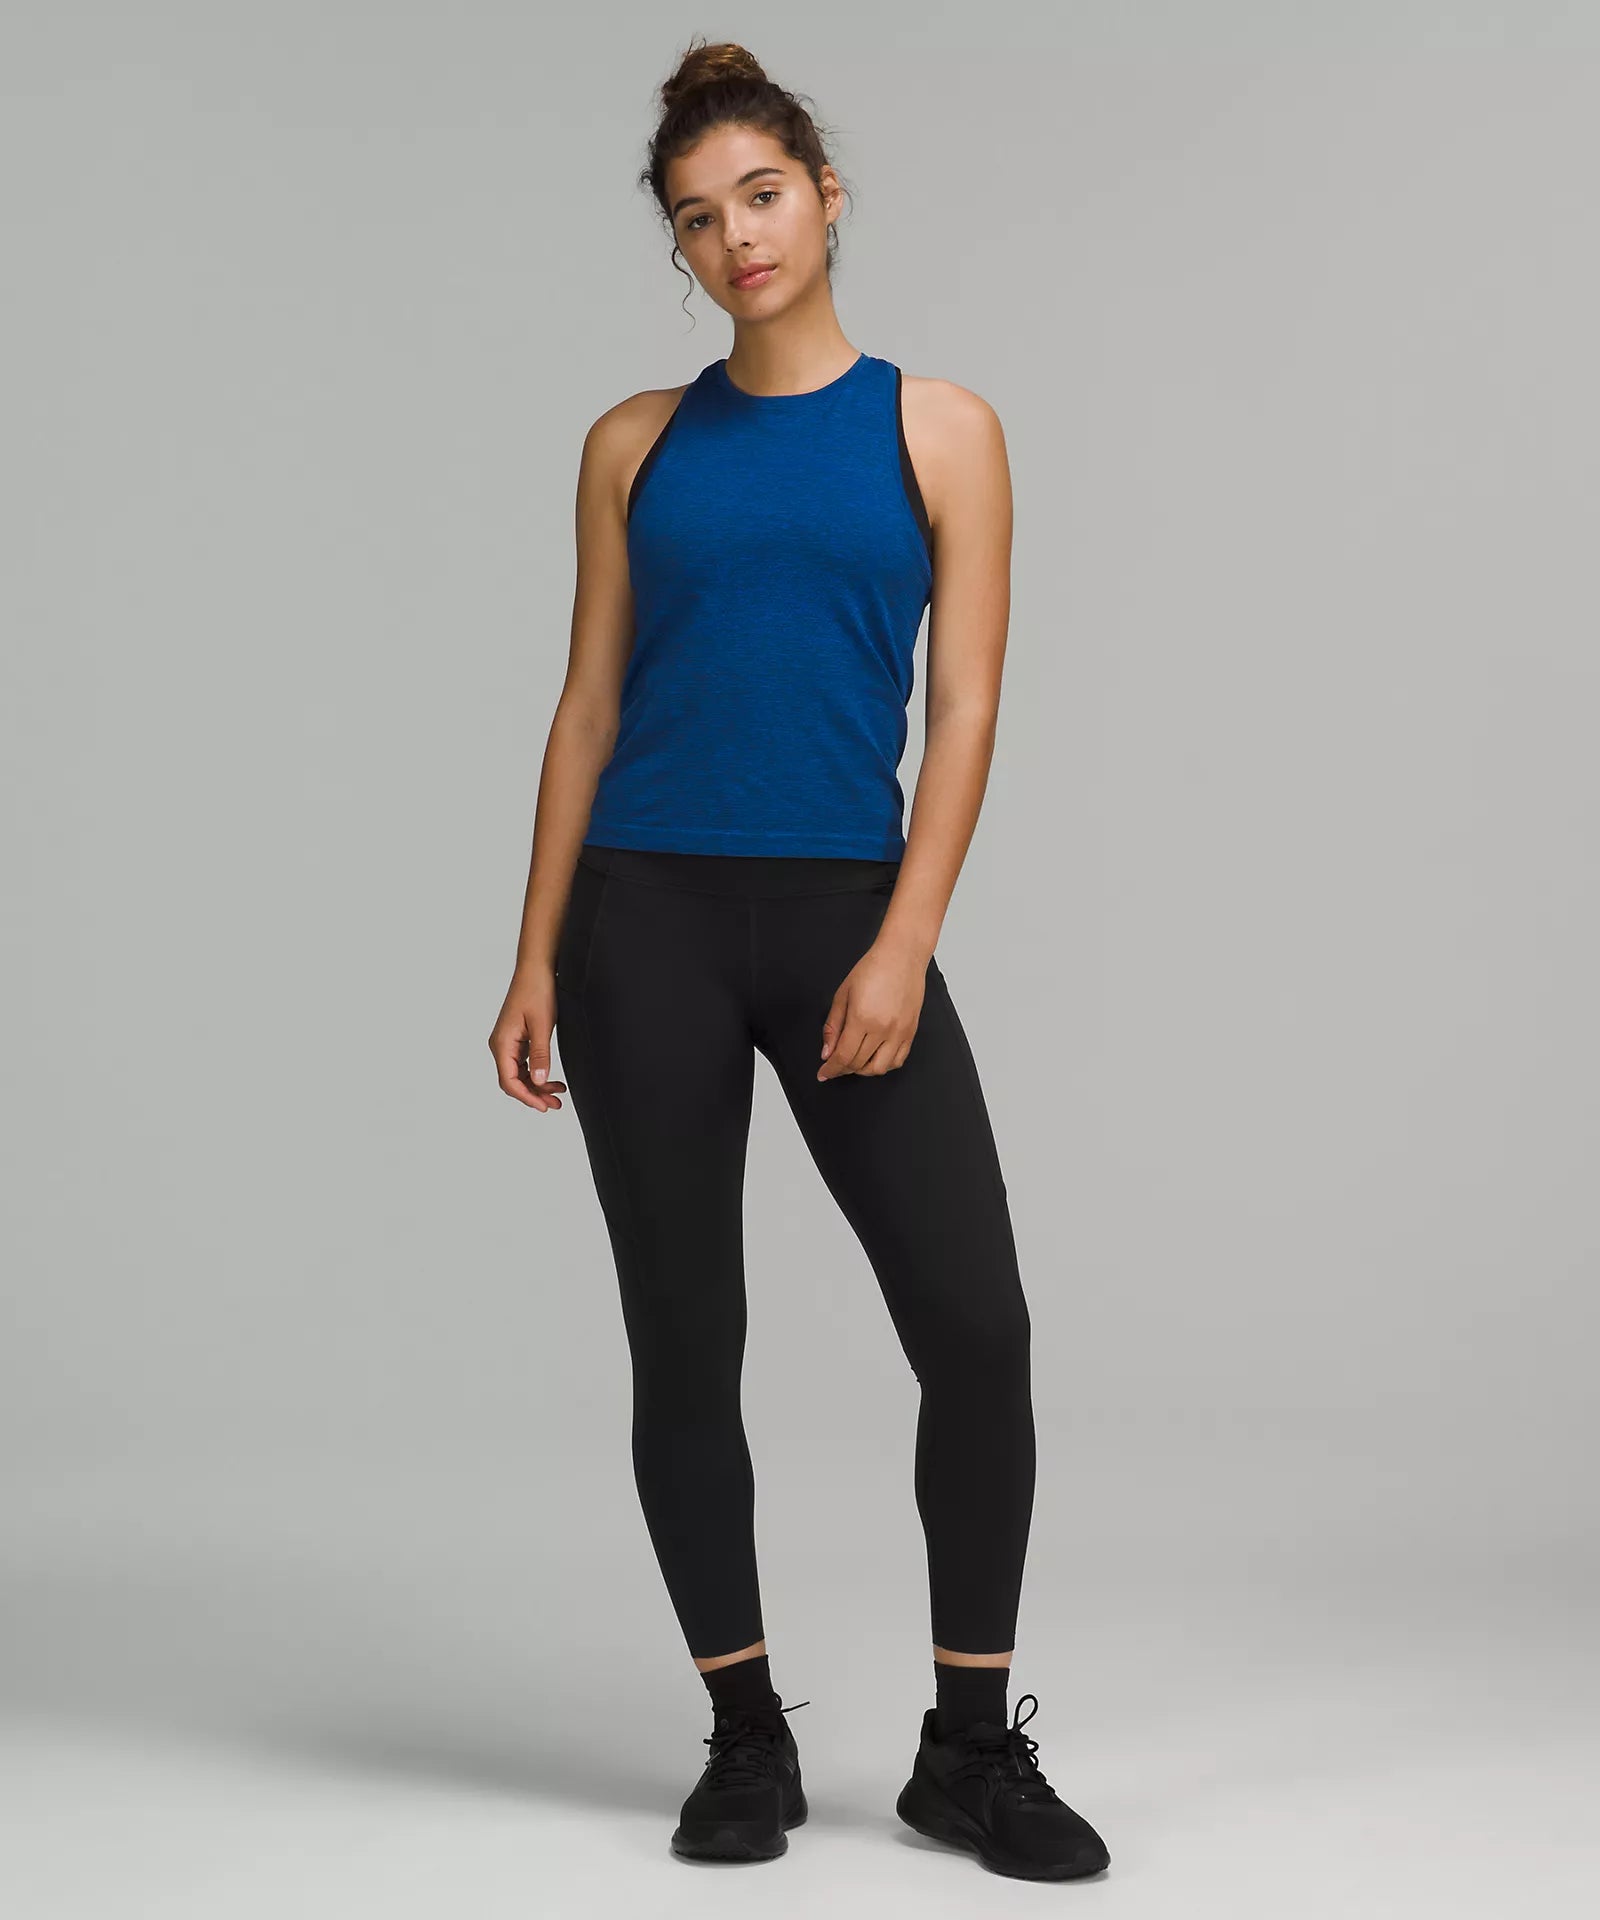 Fast and Free High-Rise Tight 25 – YTX Austin